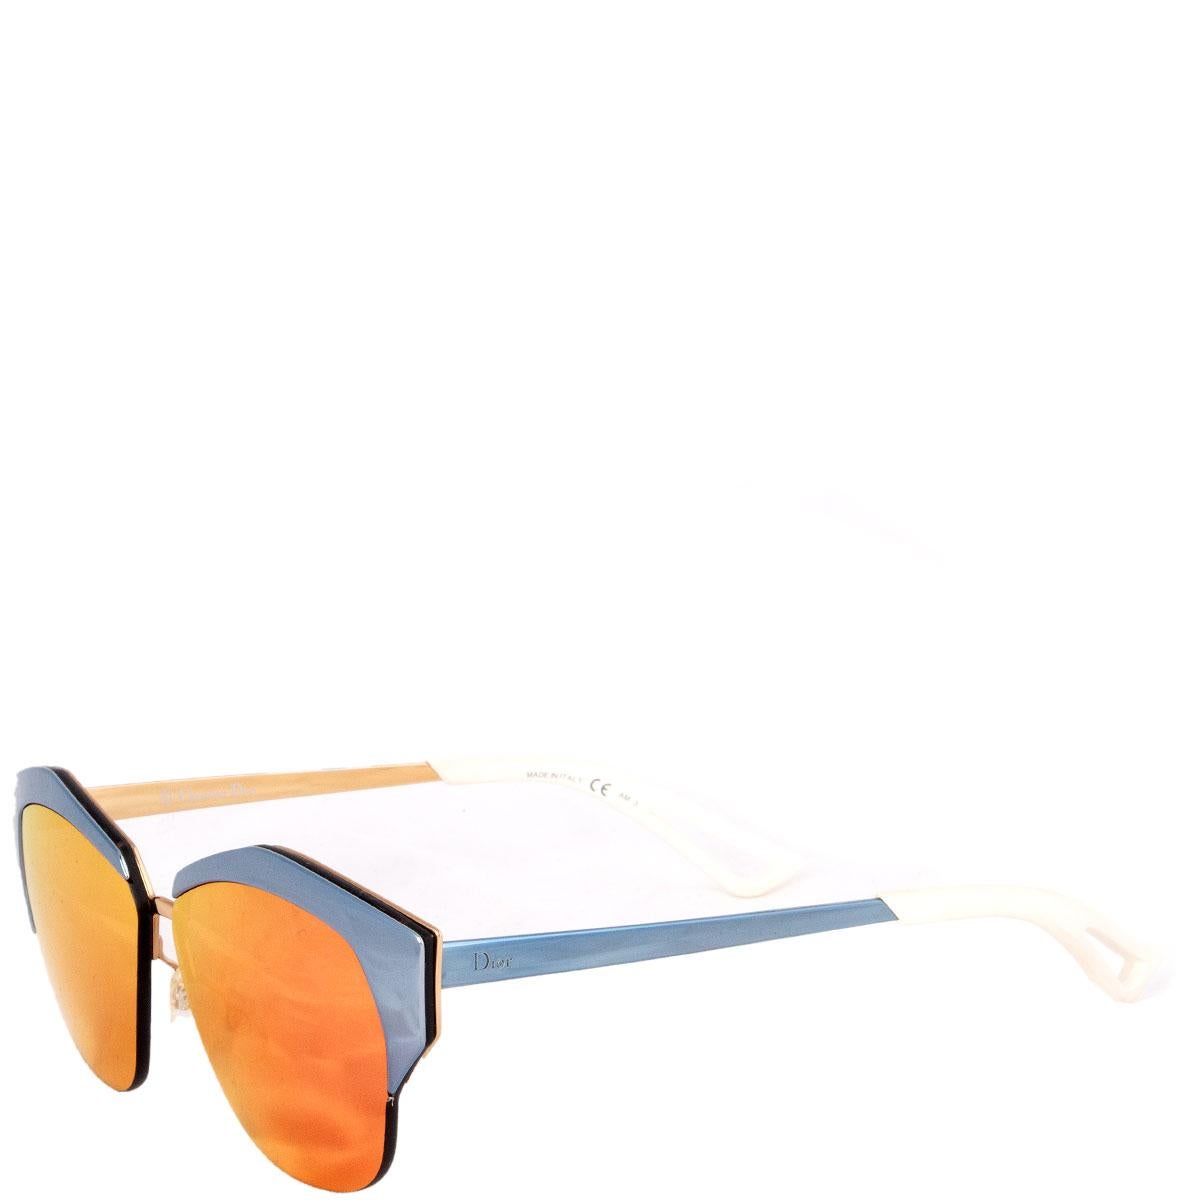 100% authentic Christian Dior 'Mirrored' sunglasses with a blue metal frame featuring pink and orange mirrored lenses. Have been worn and are in excellent condition. Come with case.

Width	14cm (5.5in)
Height	5cm (2in)

All our listings include only